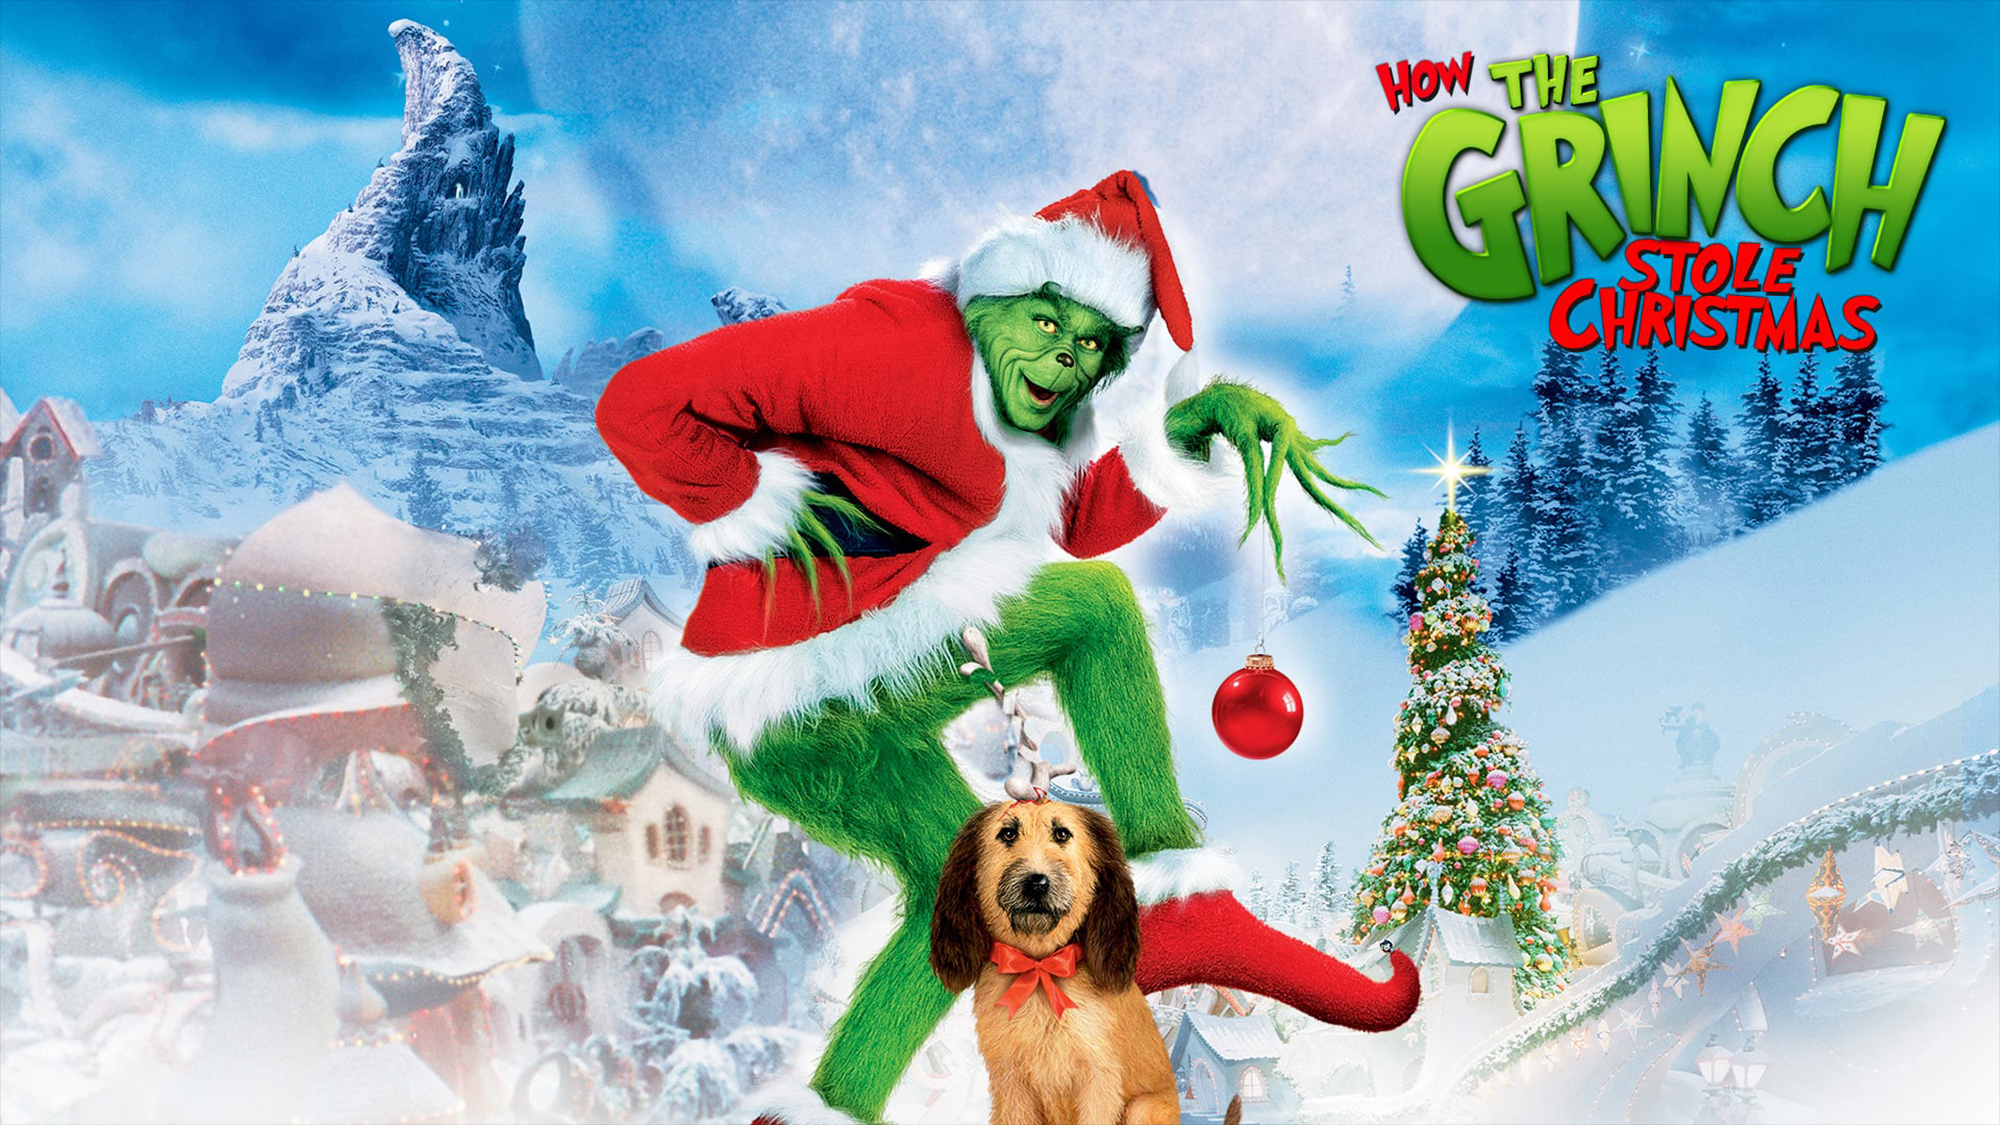 the grinch, how the grinch stole christmas, movie, jim carrey